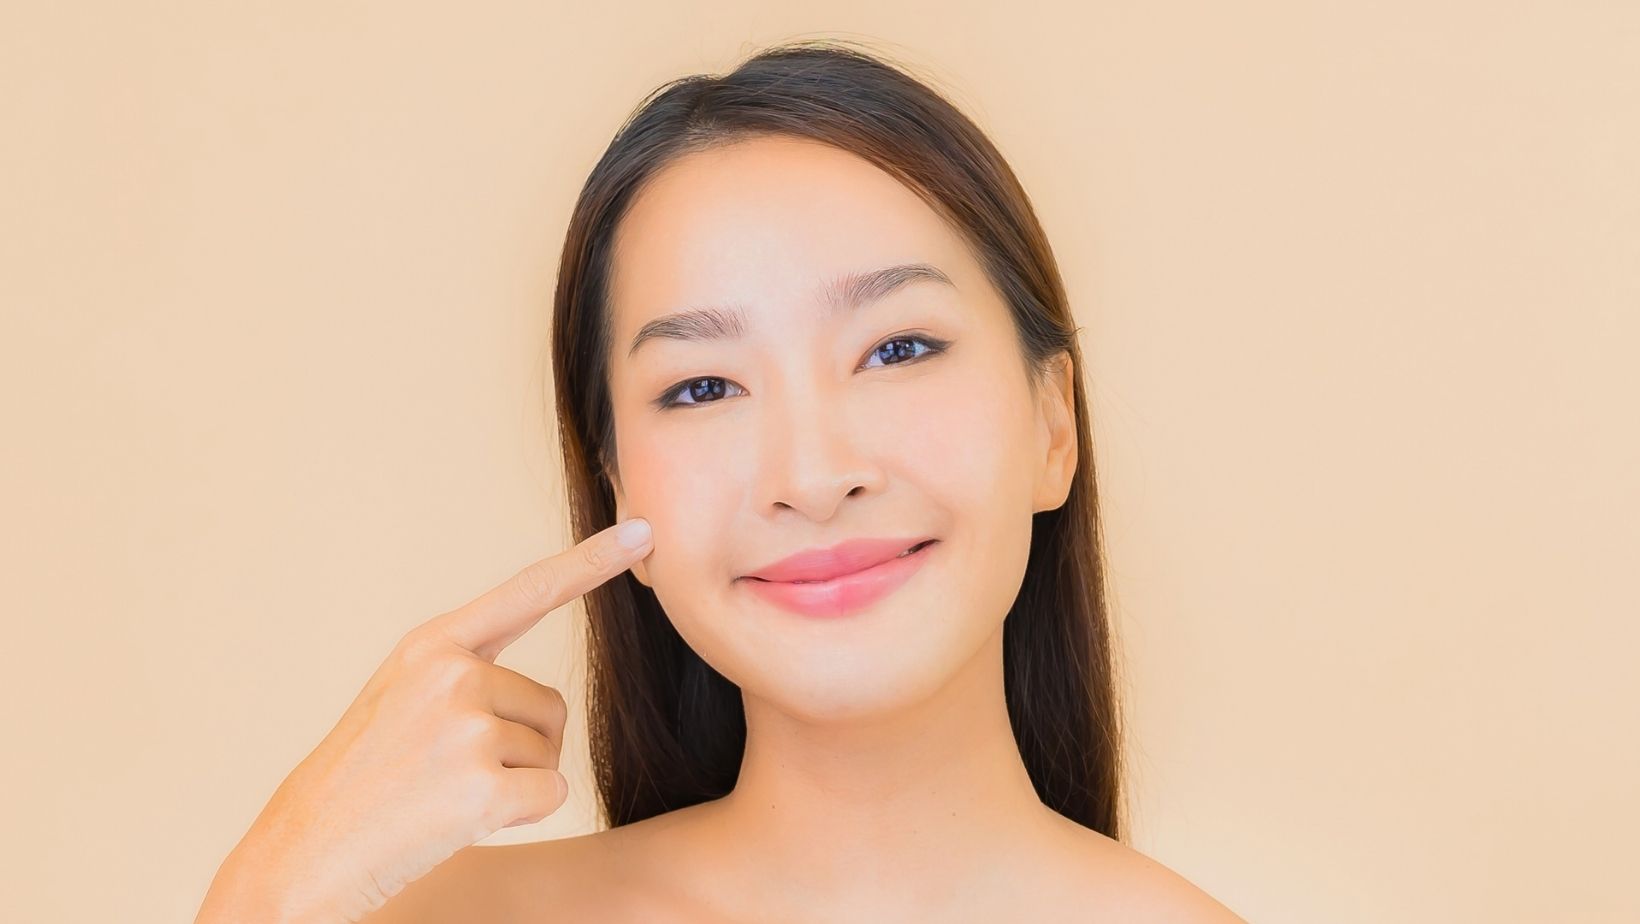 Prevent recurring acne in the same spot with these steps